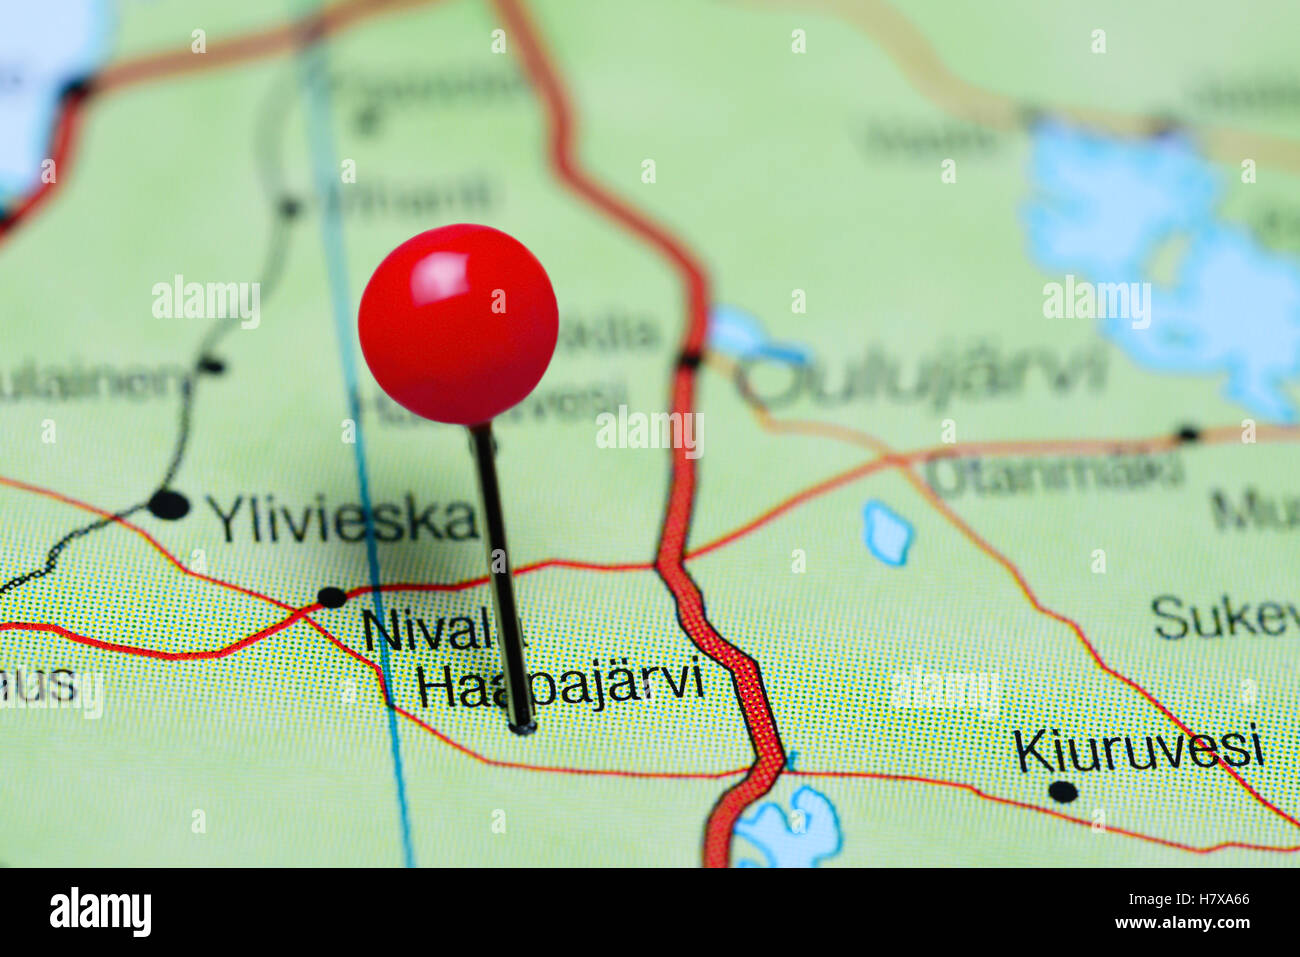 Haapajarvi pinned on a map of Finland Stock Photo